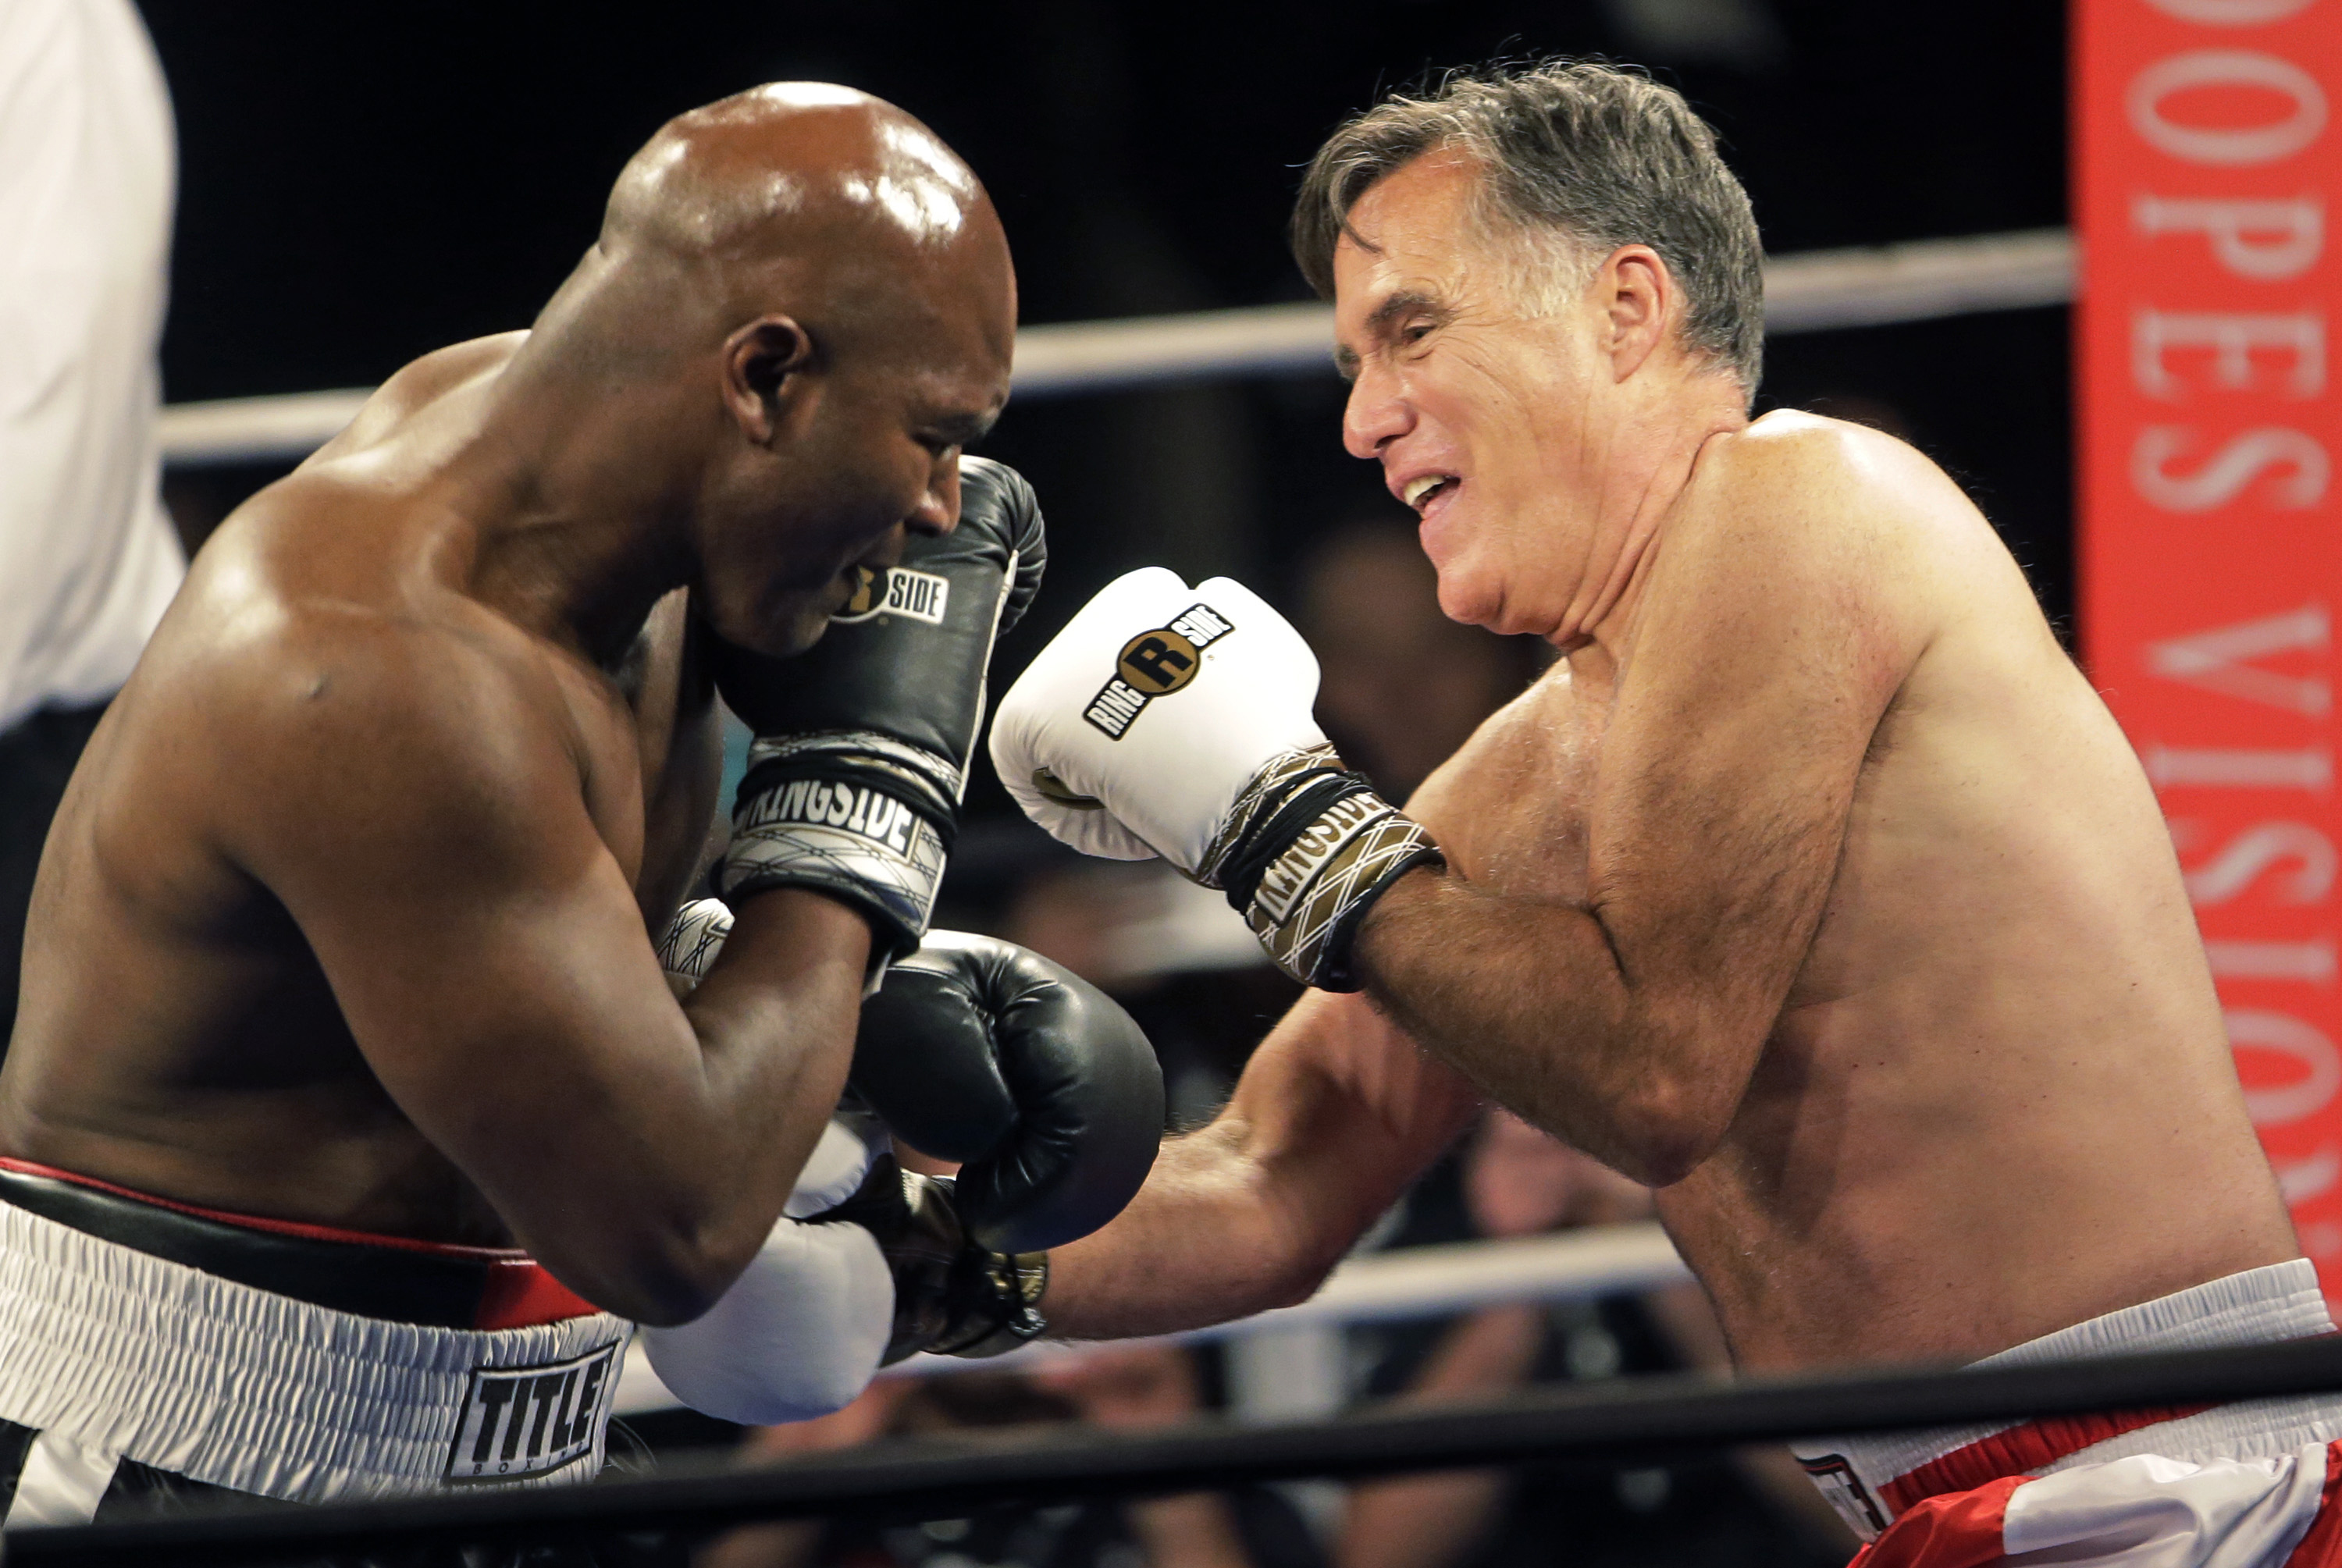 Former Republican presidential candidate Mitt Romney, right, throws punches with five-time heavyweight boxing champion Evander Holyfield at a charity fight night event on May 15, 2015, in Salt Lake City.